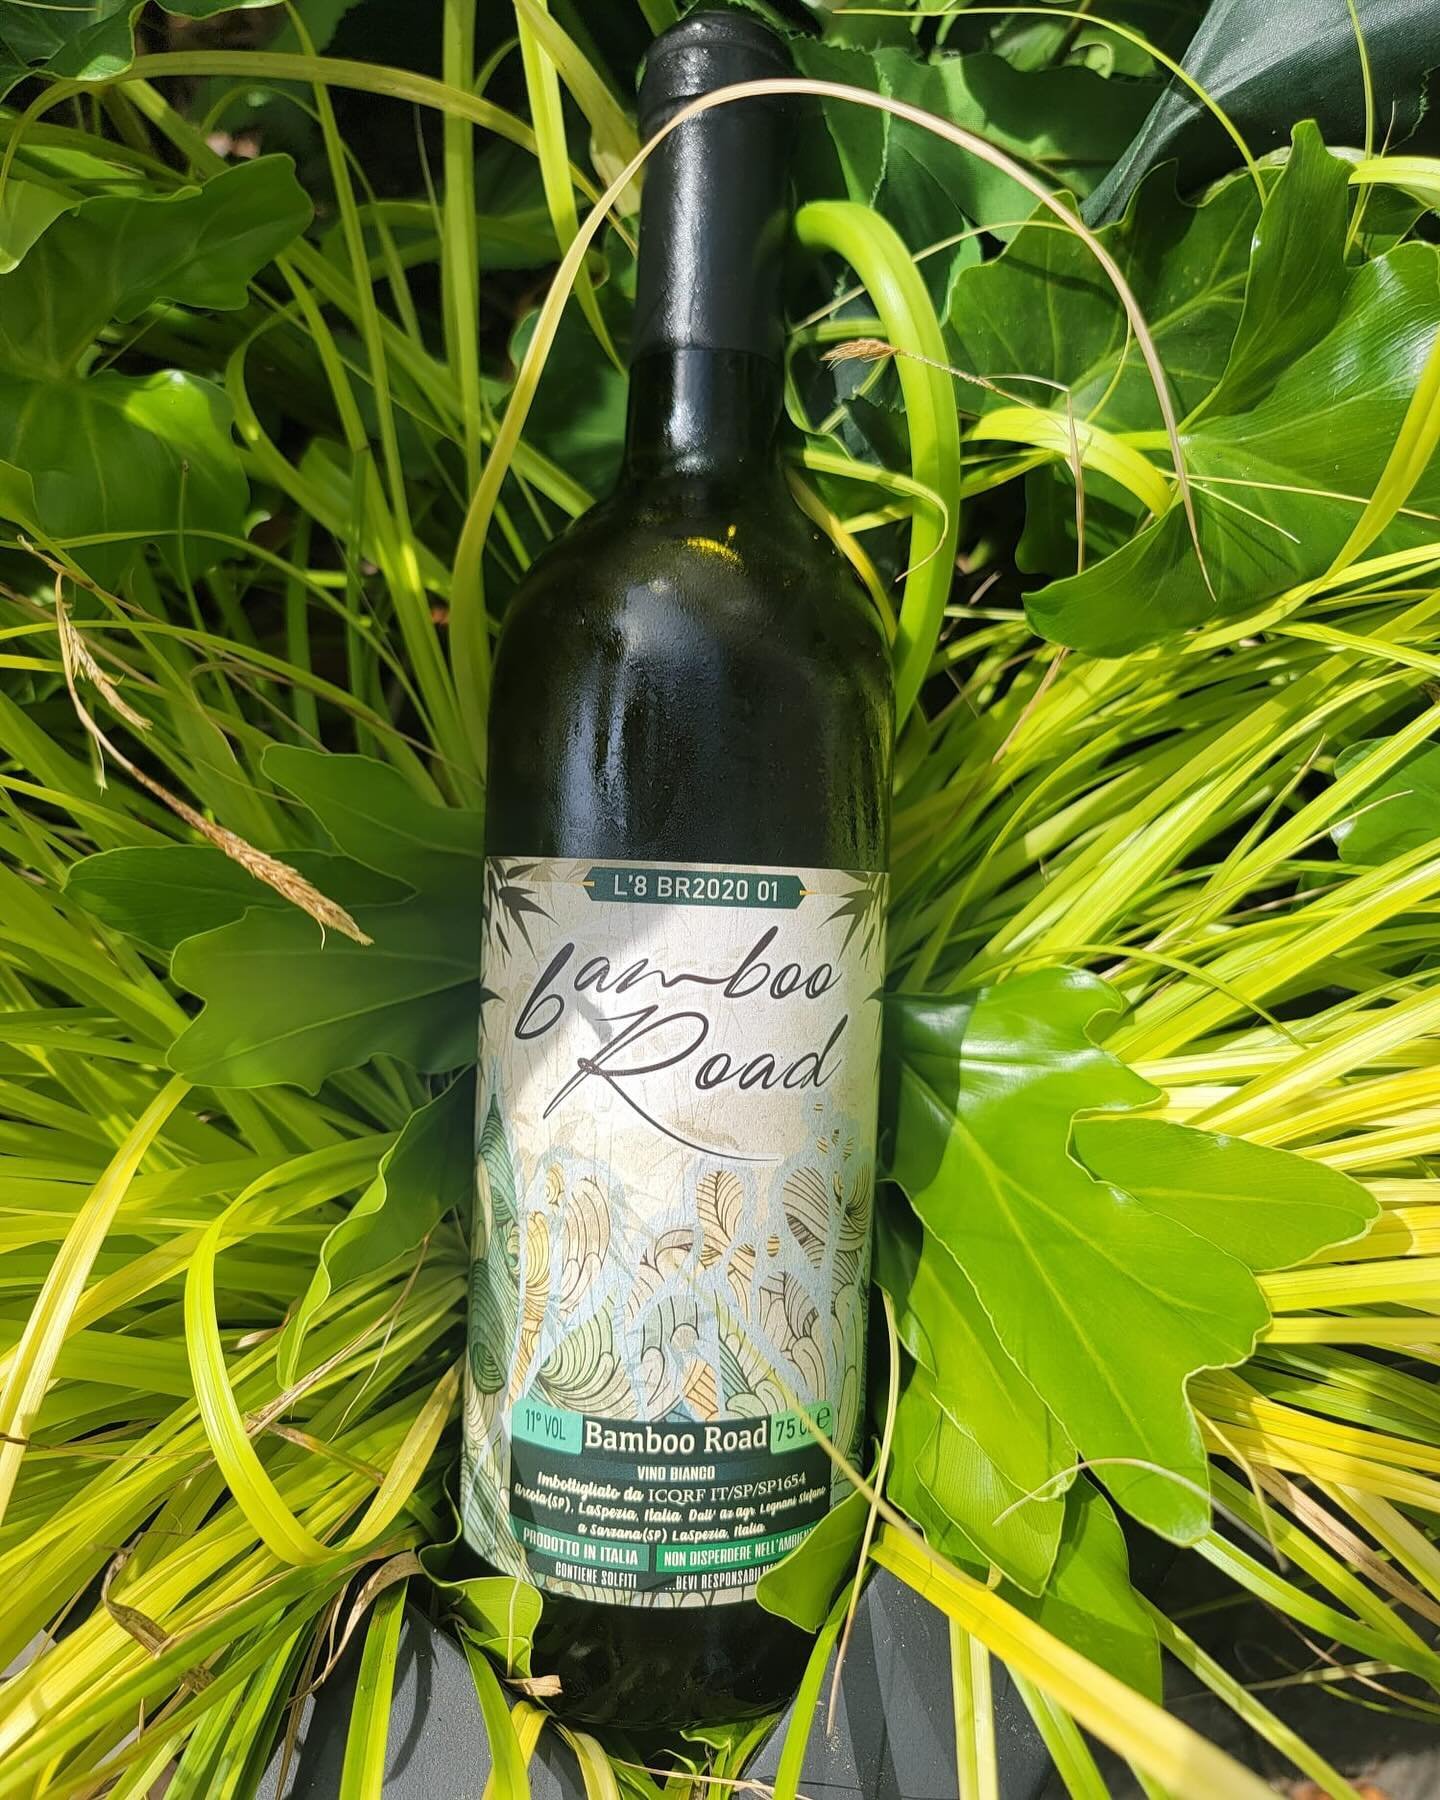 Did you know orange wine is the oldest style of wine making? This features 5 of Italy&rsquo;s most popular whites with ancient vines that range from 50 to 80 years old. Come in today and enjoy!

Wine Wednesday: Today from 11-7 come try our featured w